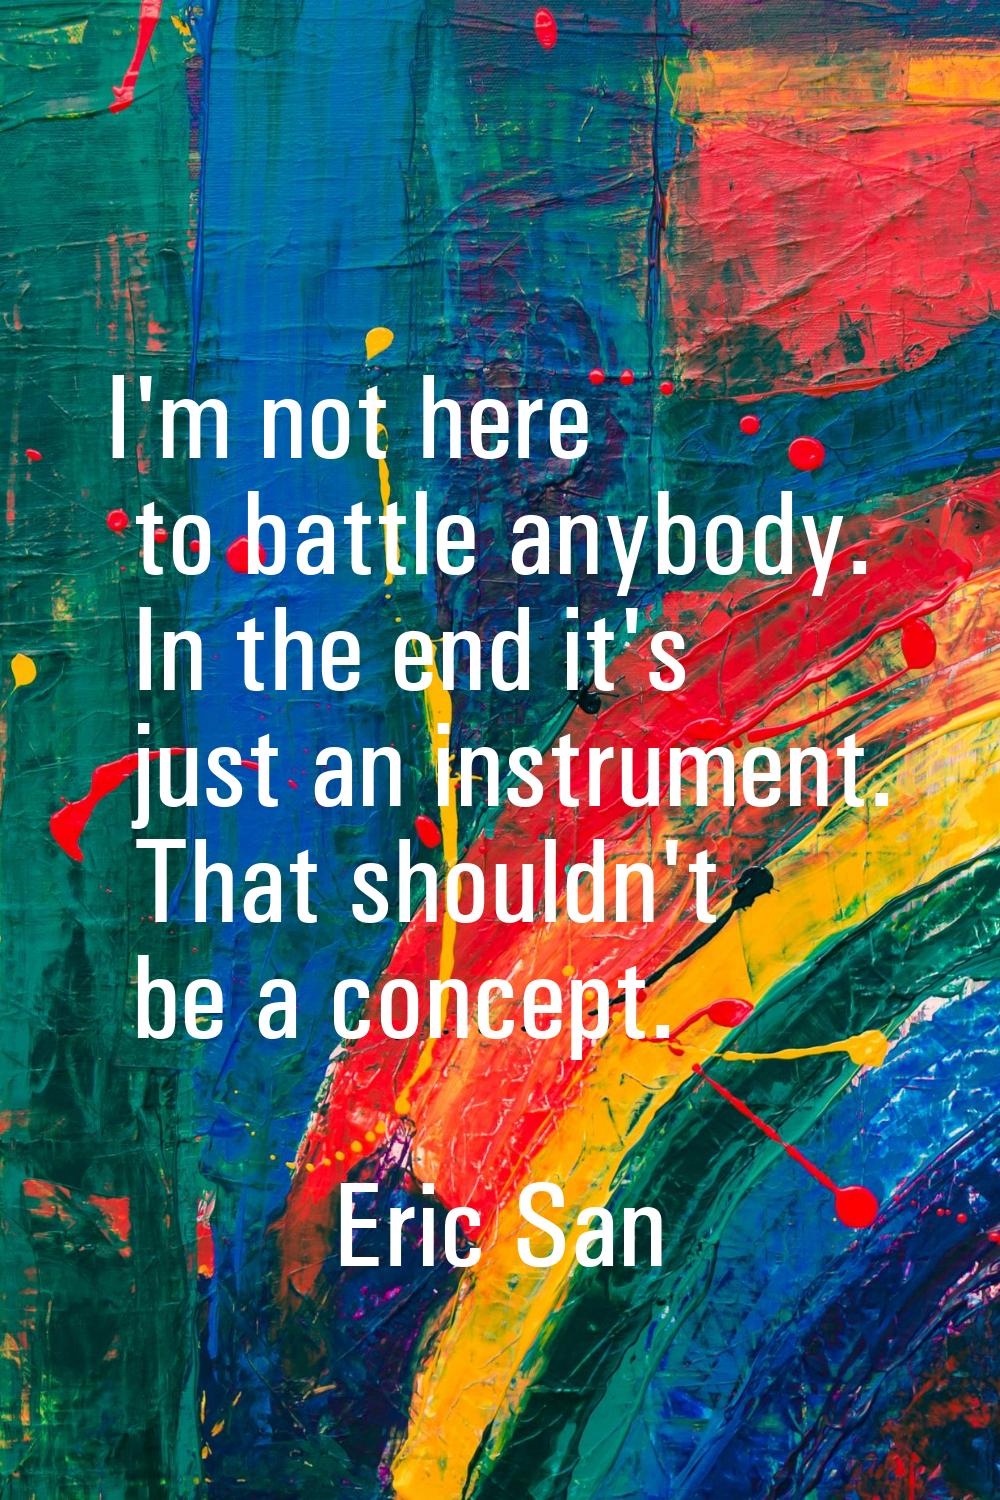 I'm not here to battle anybody. In the end it's just an instrument. That shouldn't be a concept.